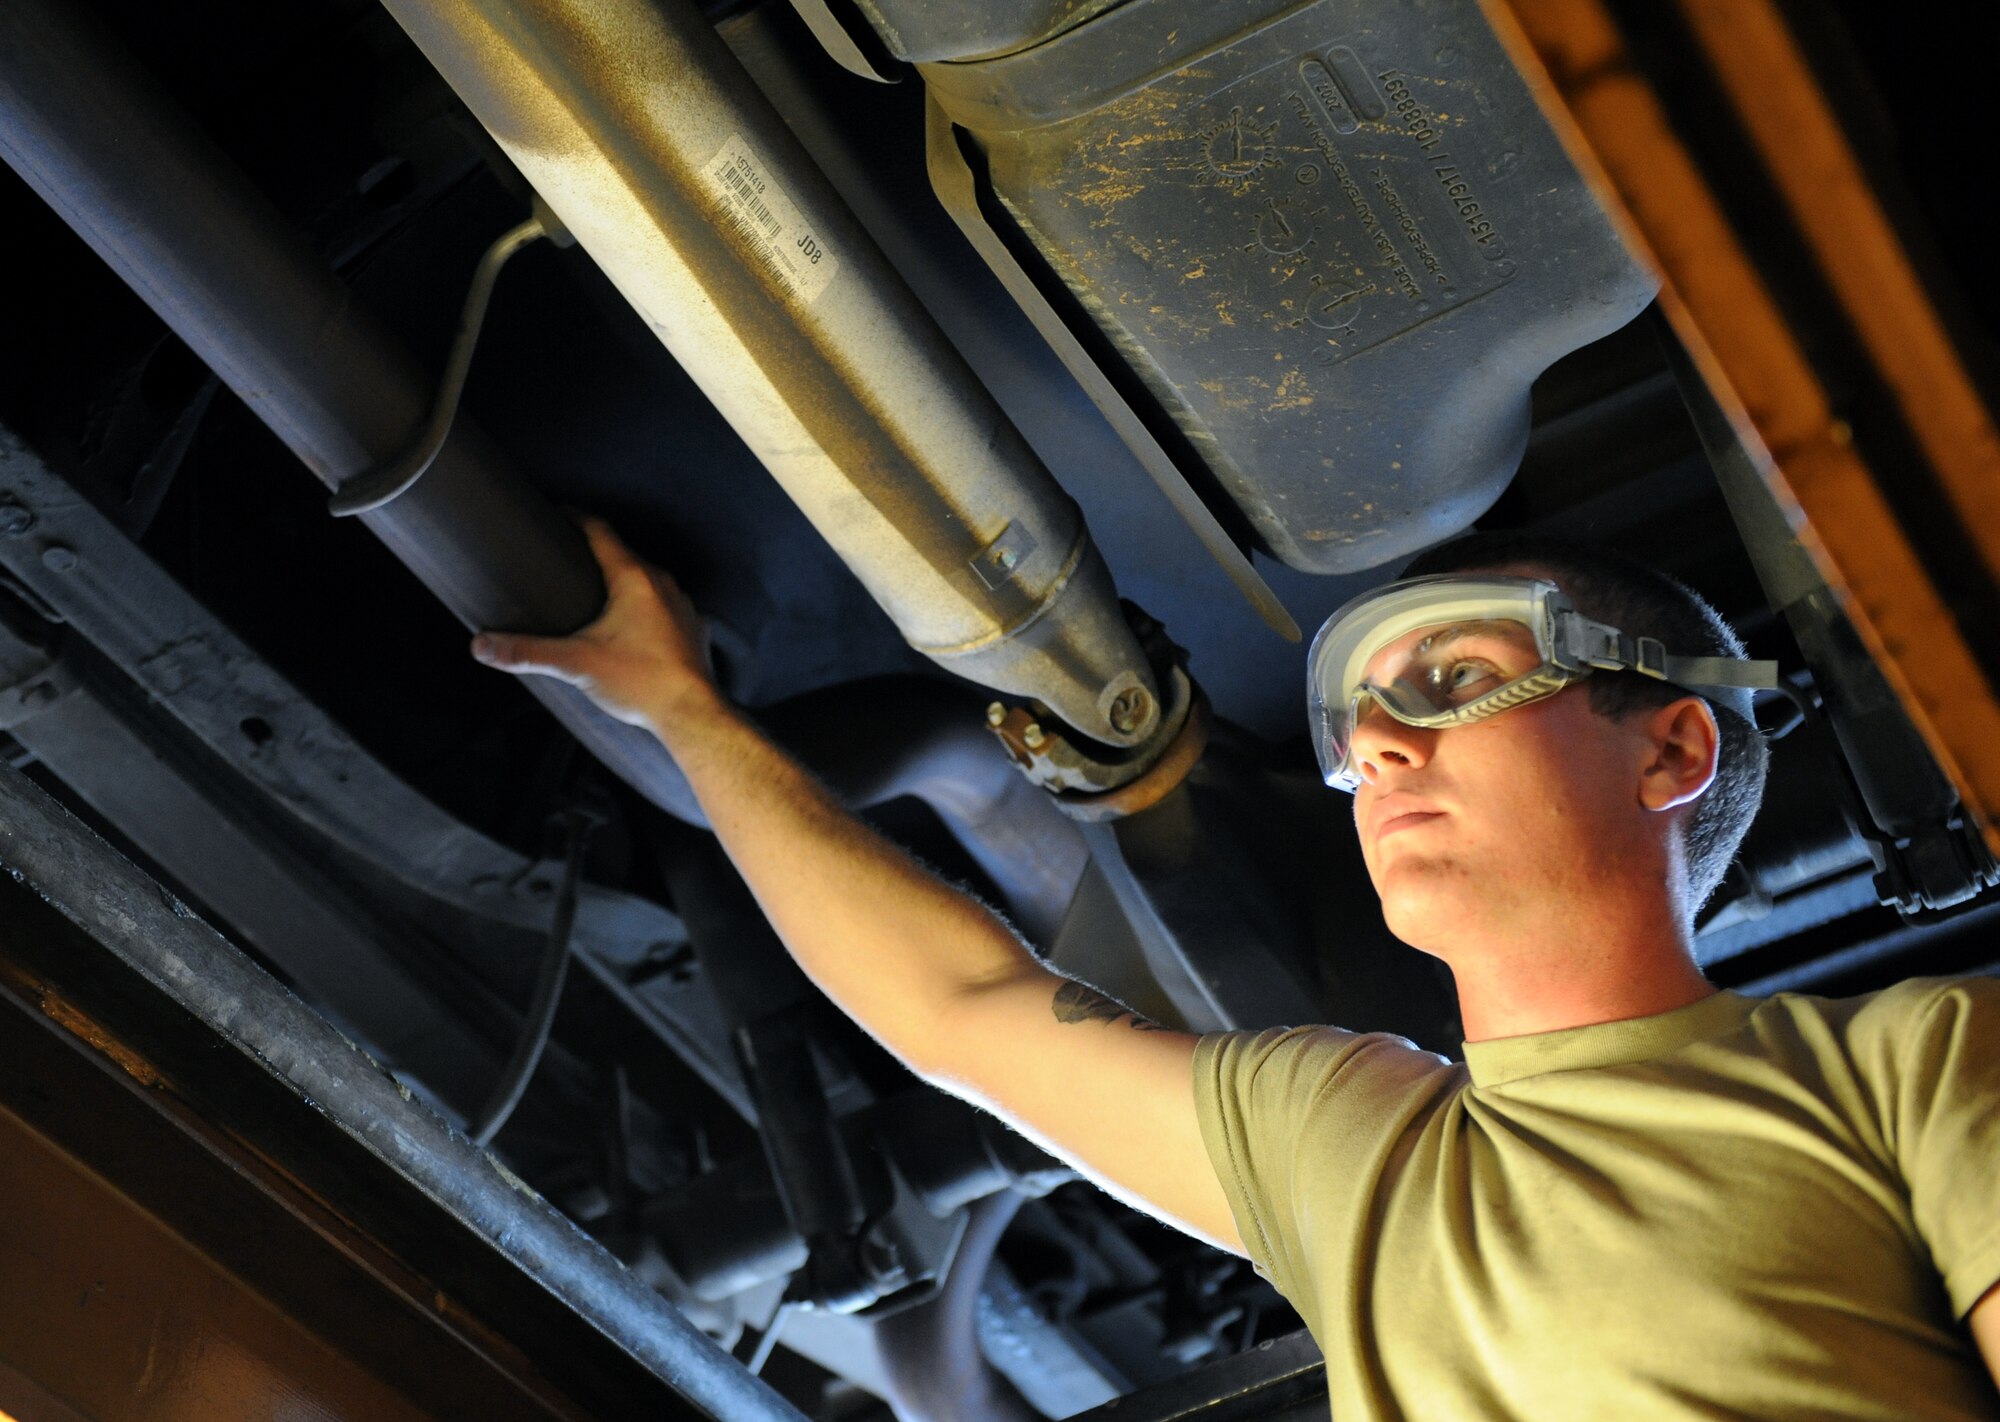 Airman 1st Class Cody Akers, 2nd Logistics Readiness Squadron Vehicle Maintenance lube rack technician, ensures an exhaust pipe is properly connected to a vehicle on Barksdale Air Force Base, La., Oct. 24. Lube rack technicians perform oil changes, filter changes and inspect the vehicles' fluid systems. Every month, more than 50 vehicles are inspected. (U.S. Air Force photo/Airman 1st Class Benjamin Gonsier)(RELEASED)

